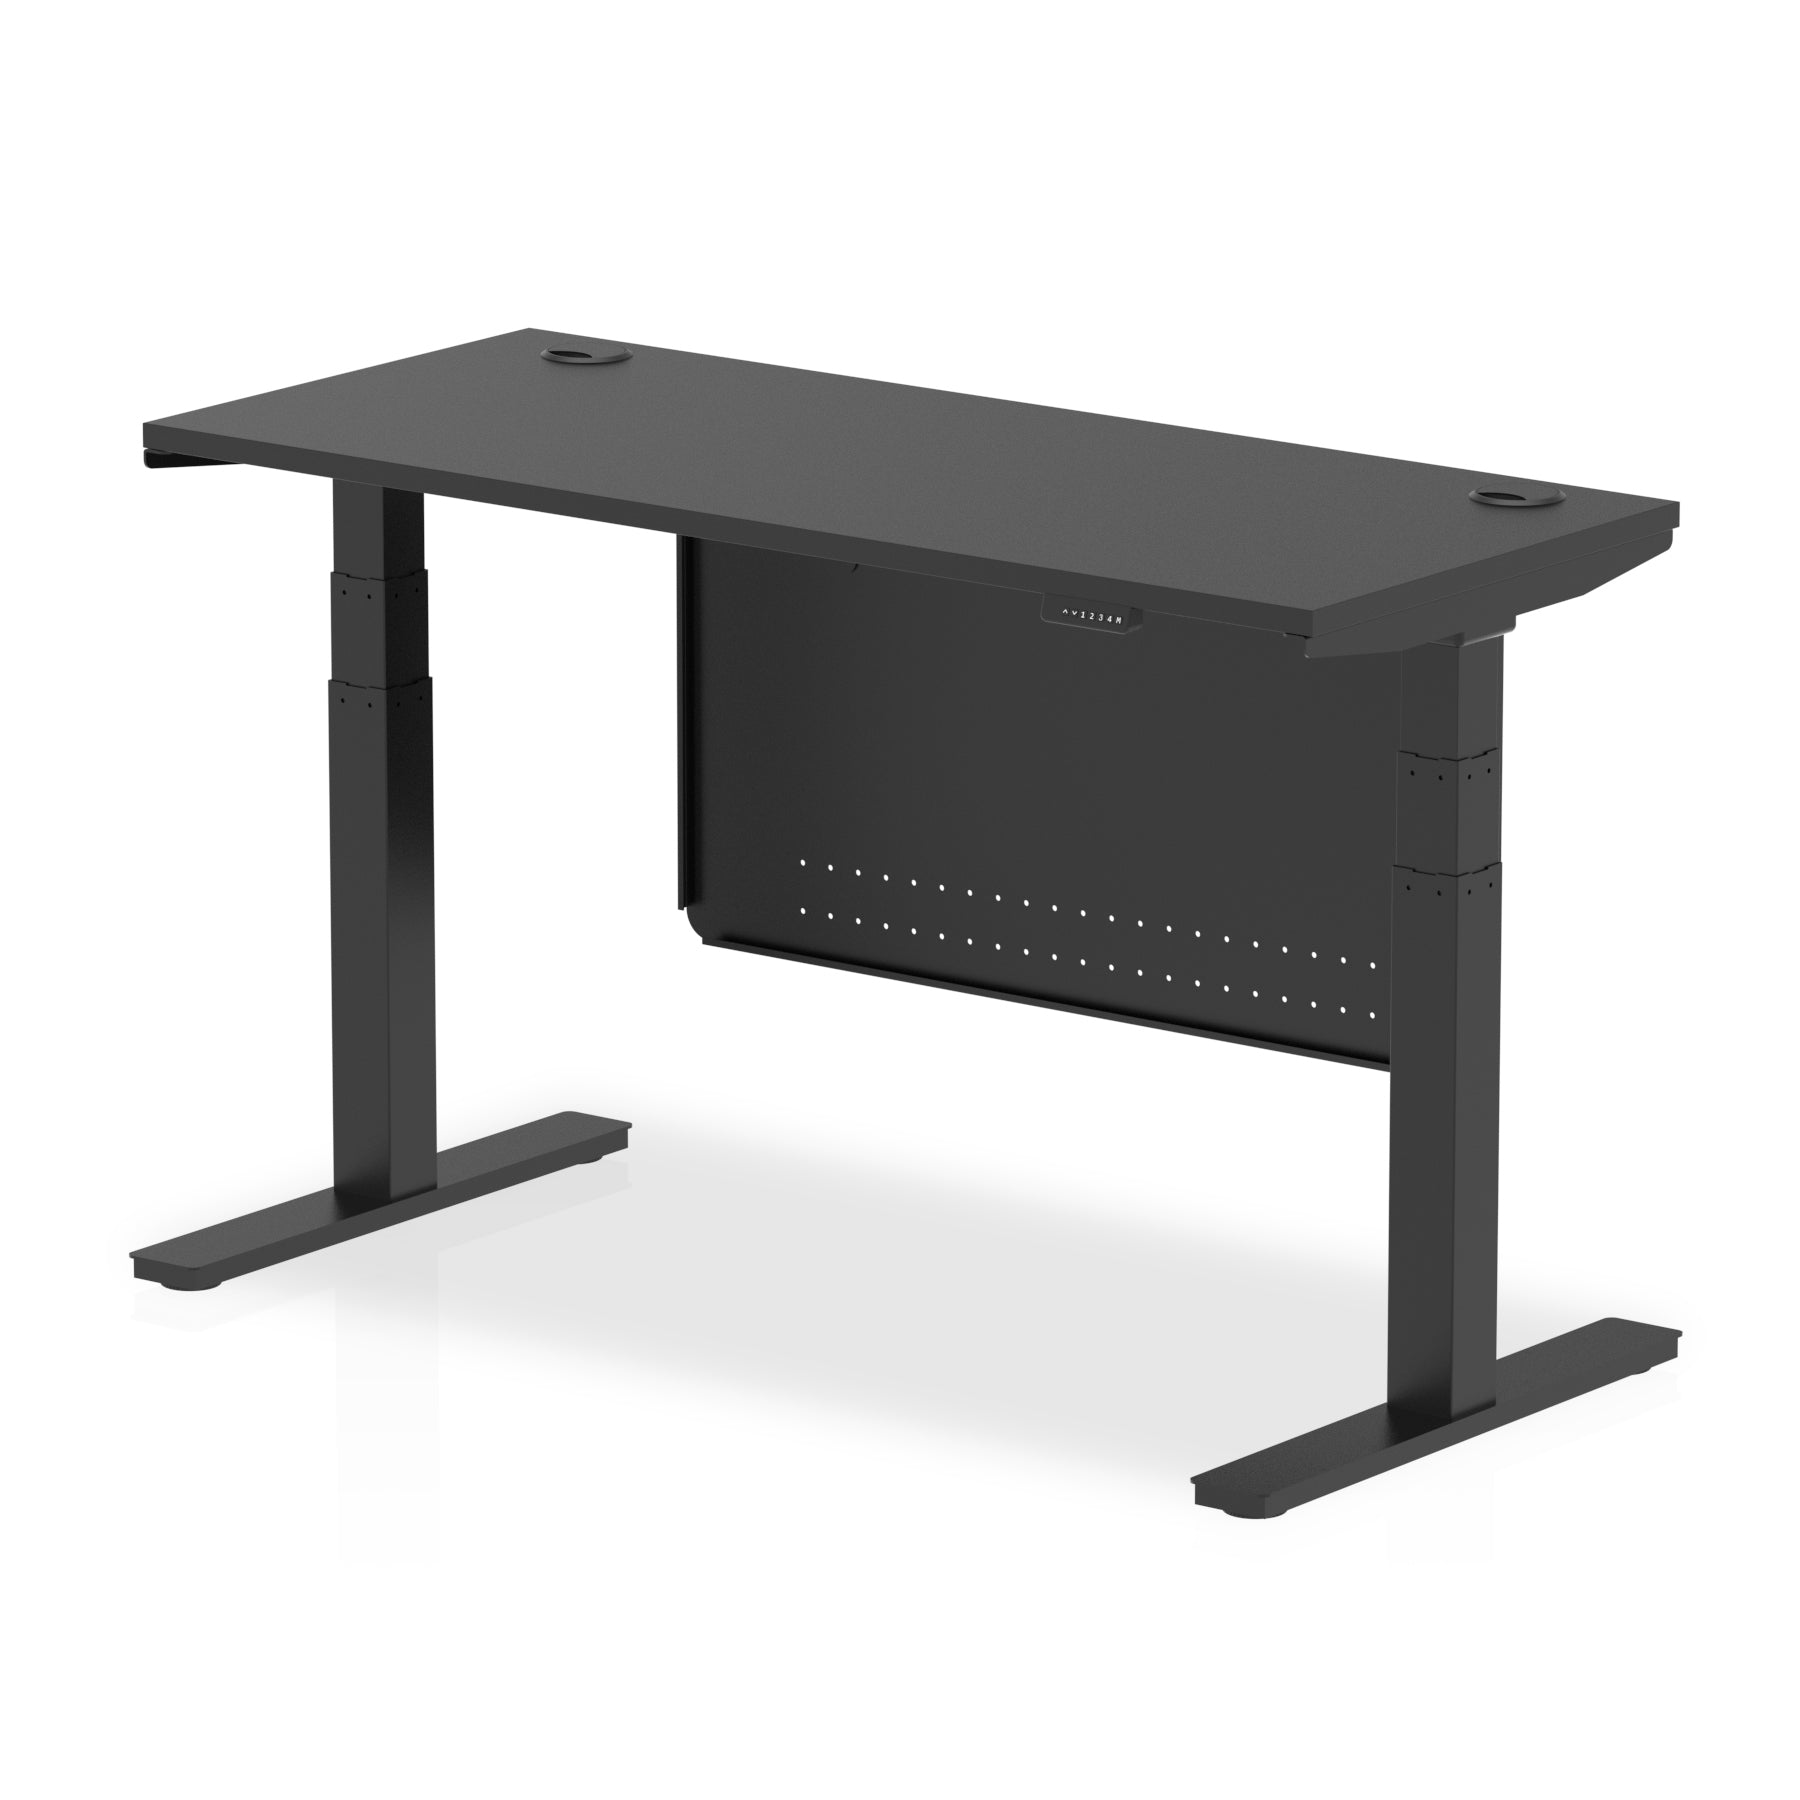 Air Height Adjustable Black Series Slimline Desk with Cable Ports with Steel Modesty Panel